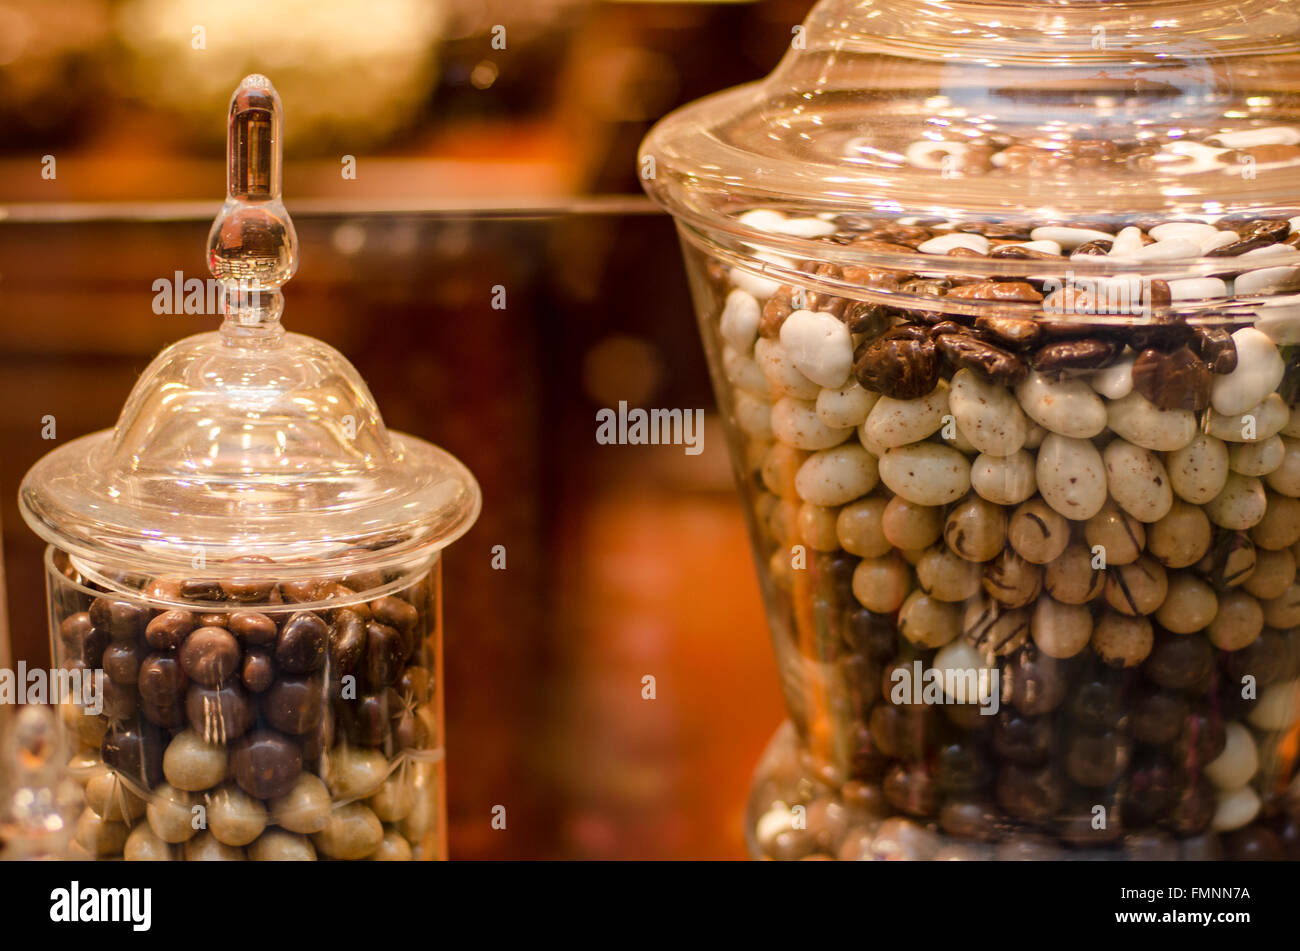 Details close-up of delicious traditional chocolate Belgian pralines in the glass jar. Stock Photo